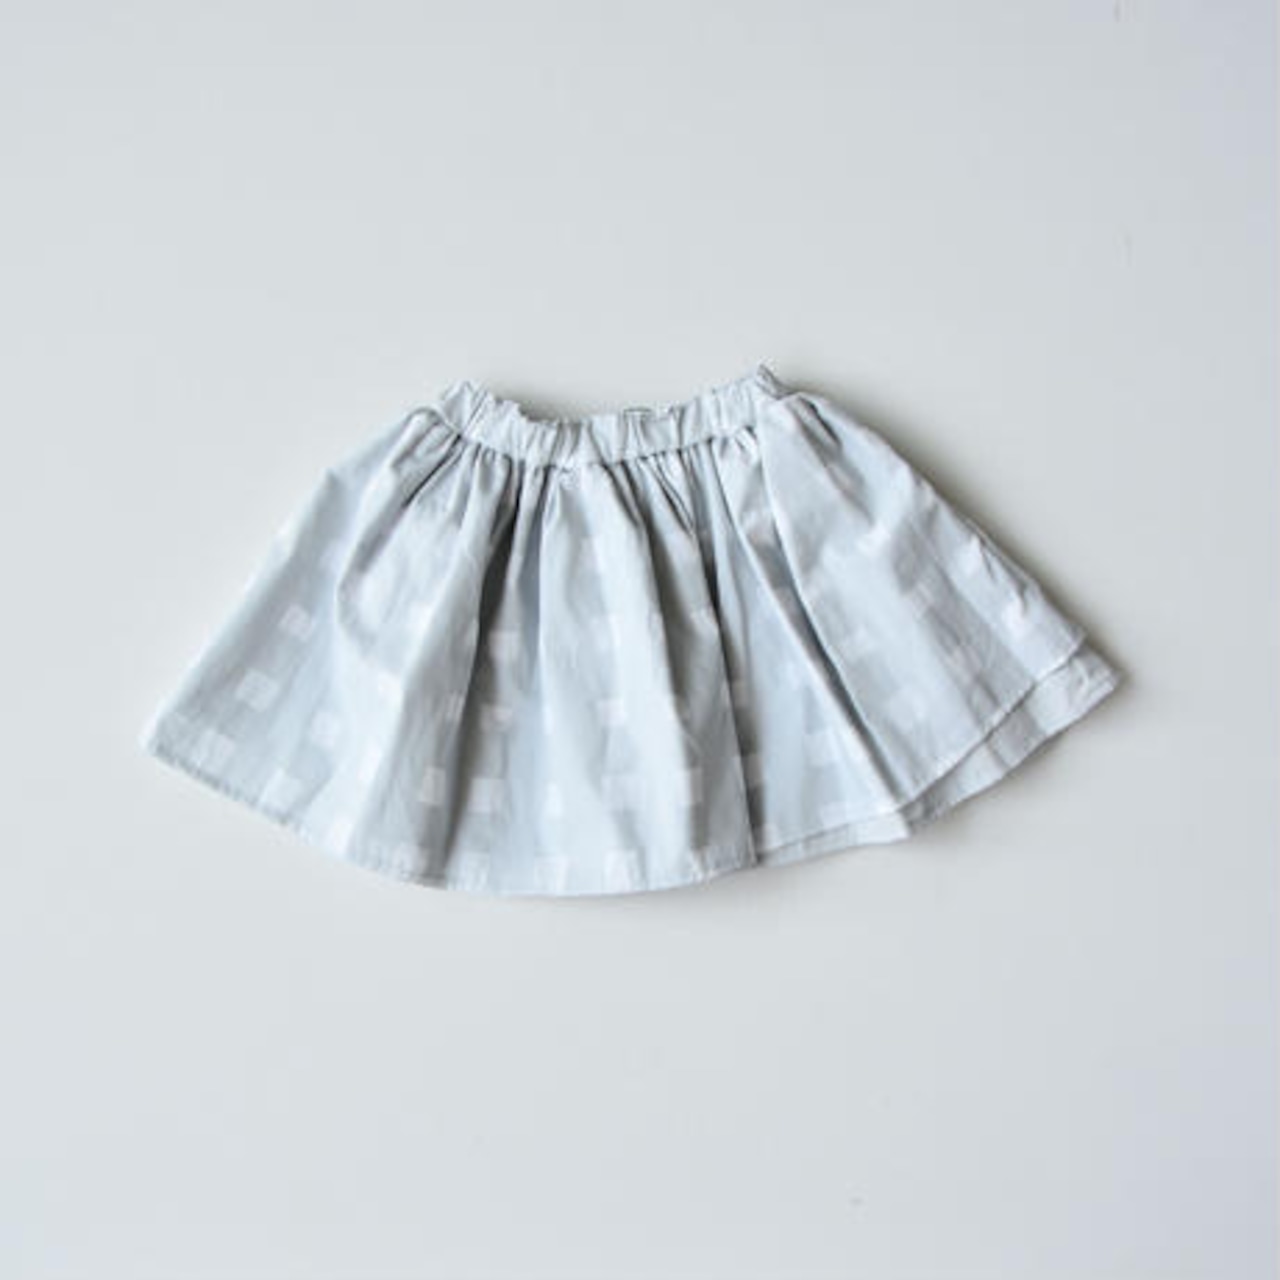 【 franky grow 22SS 】ORIG. CHECK AIRY SKIRT [22SBT-267]　”スカート”  Grey x White check